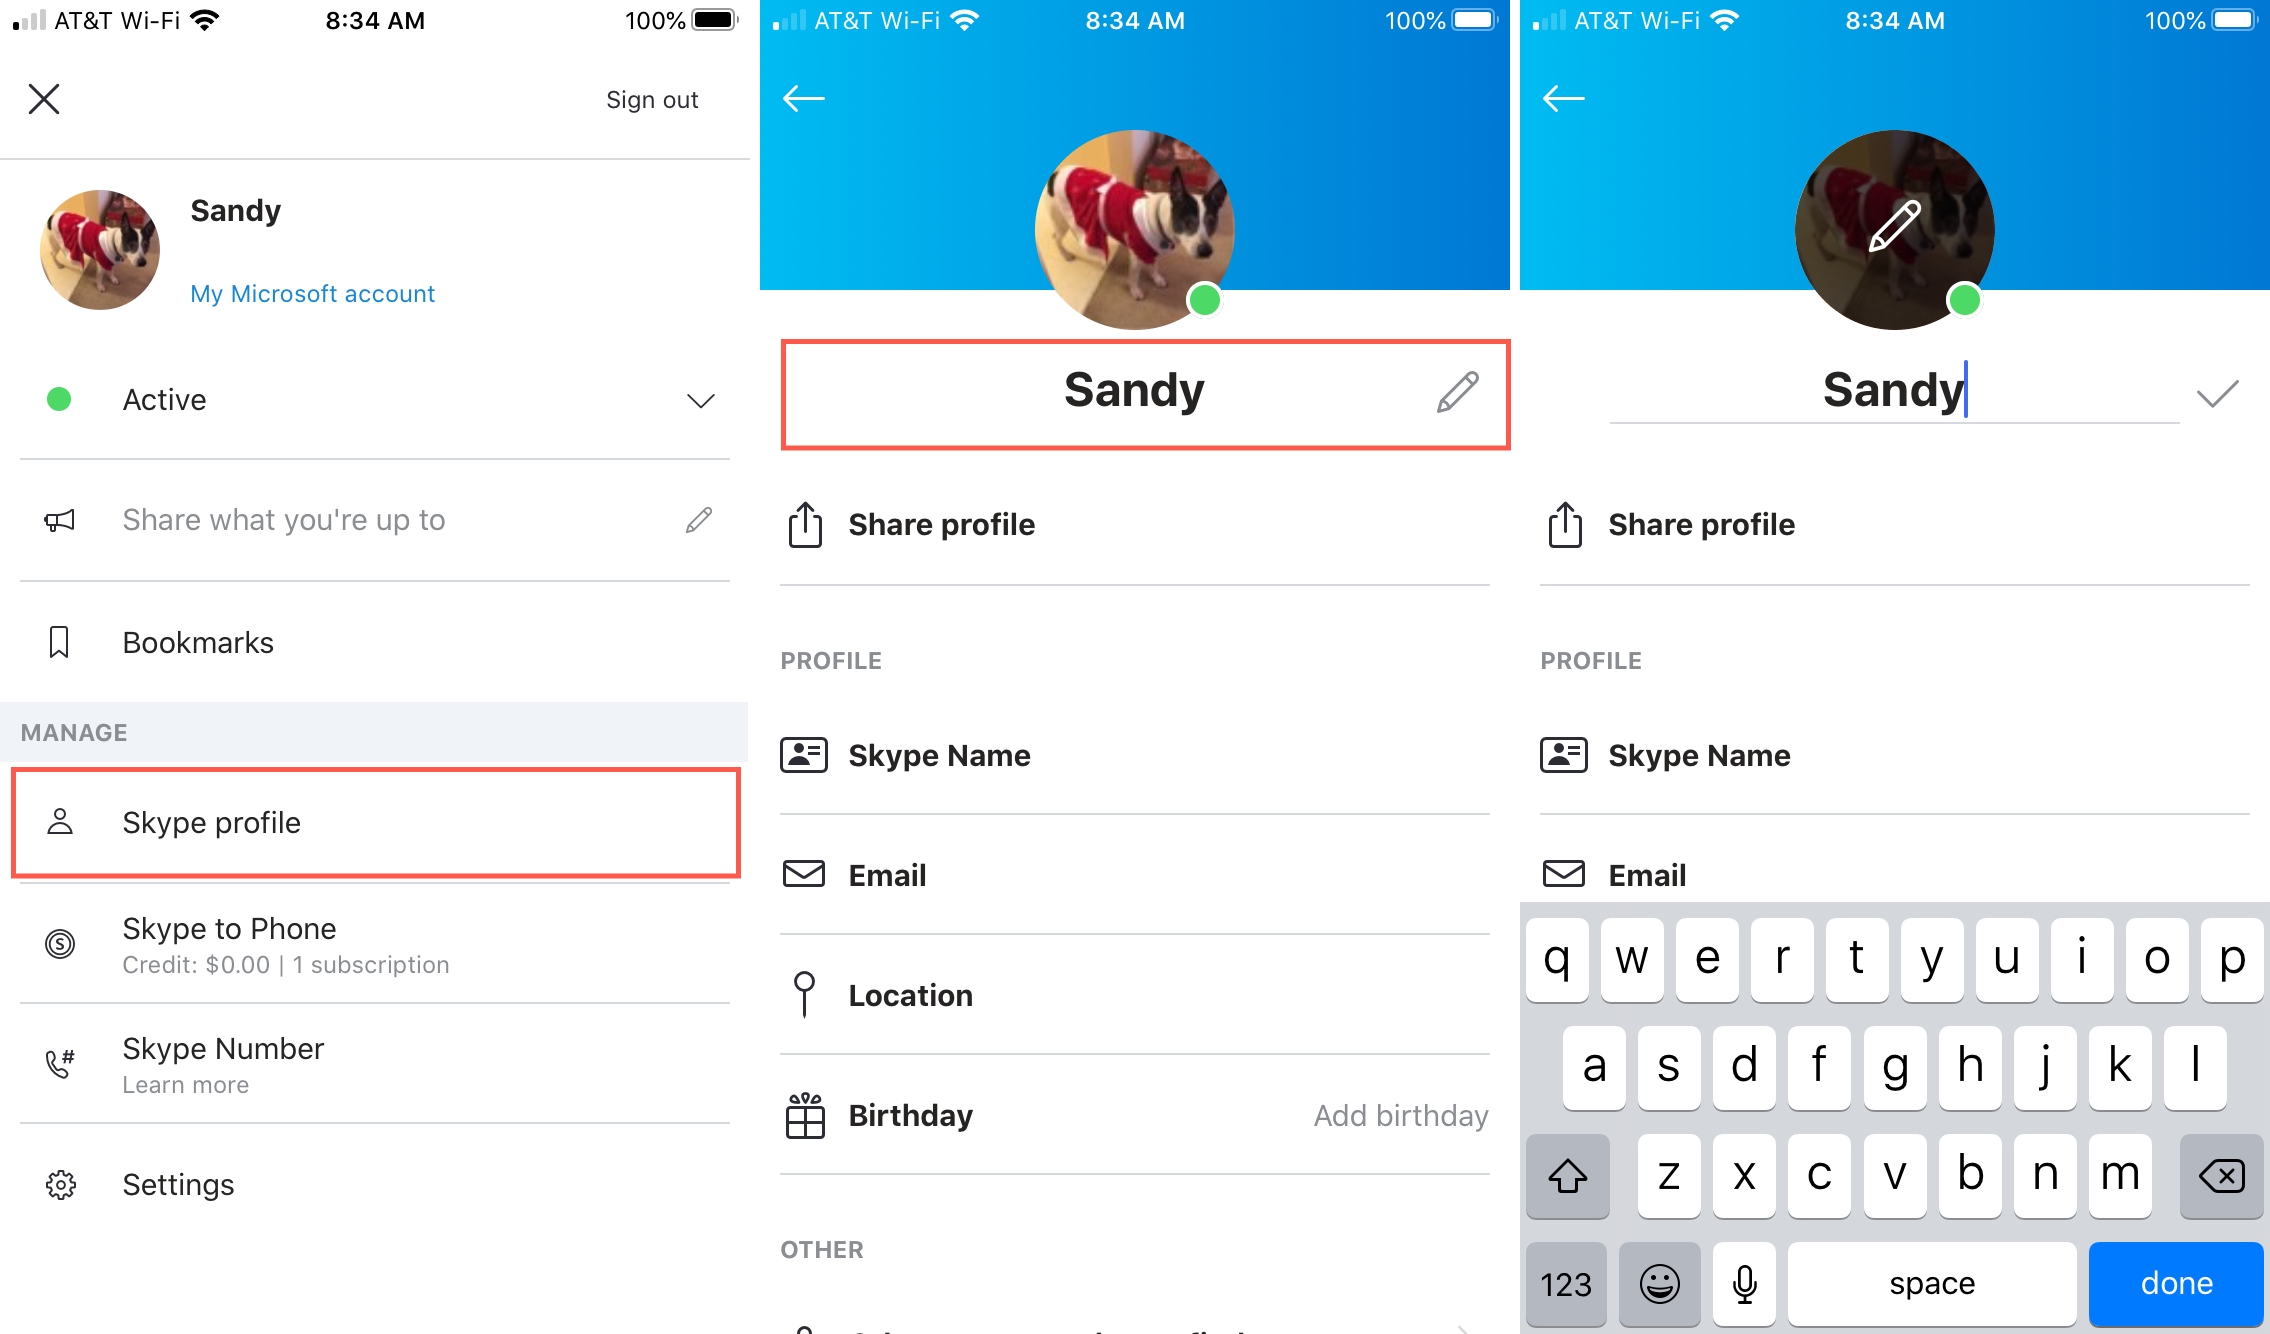 Edit your Skype display name on the app